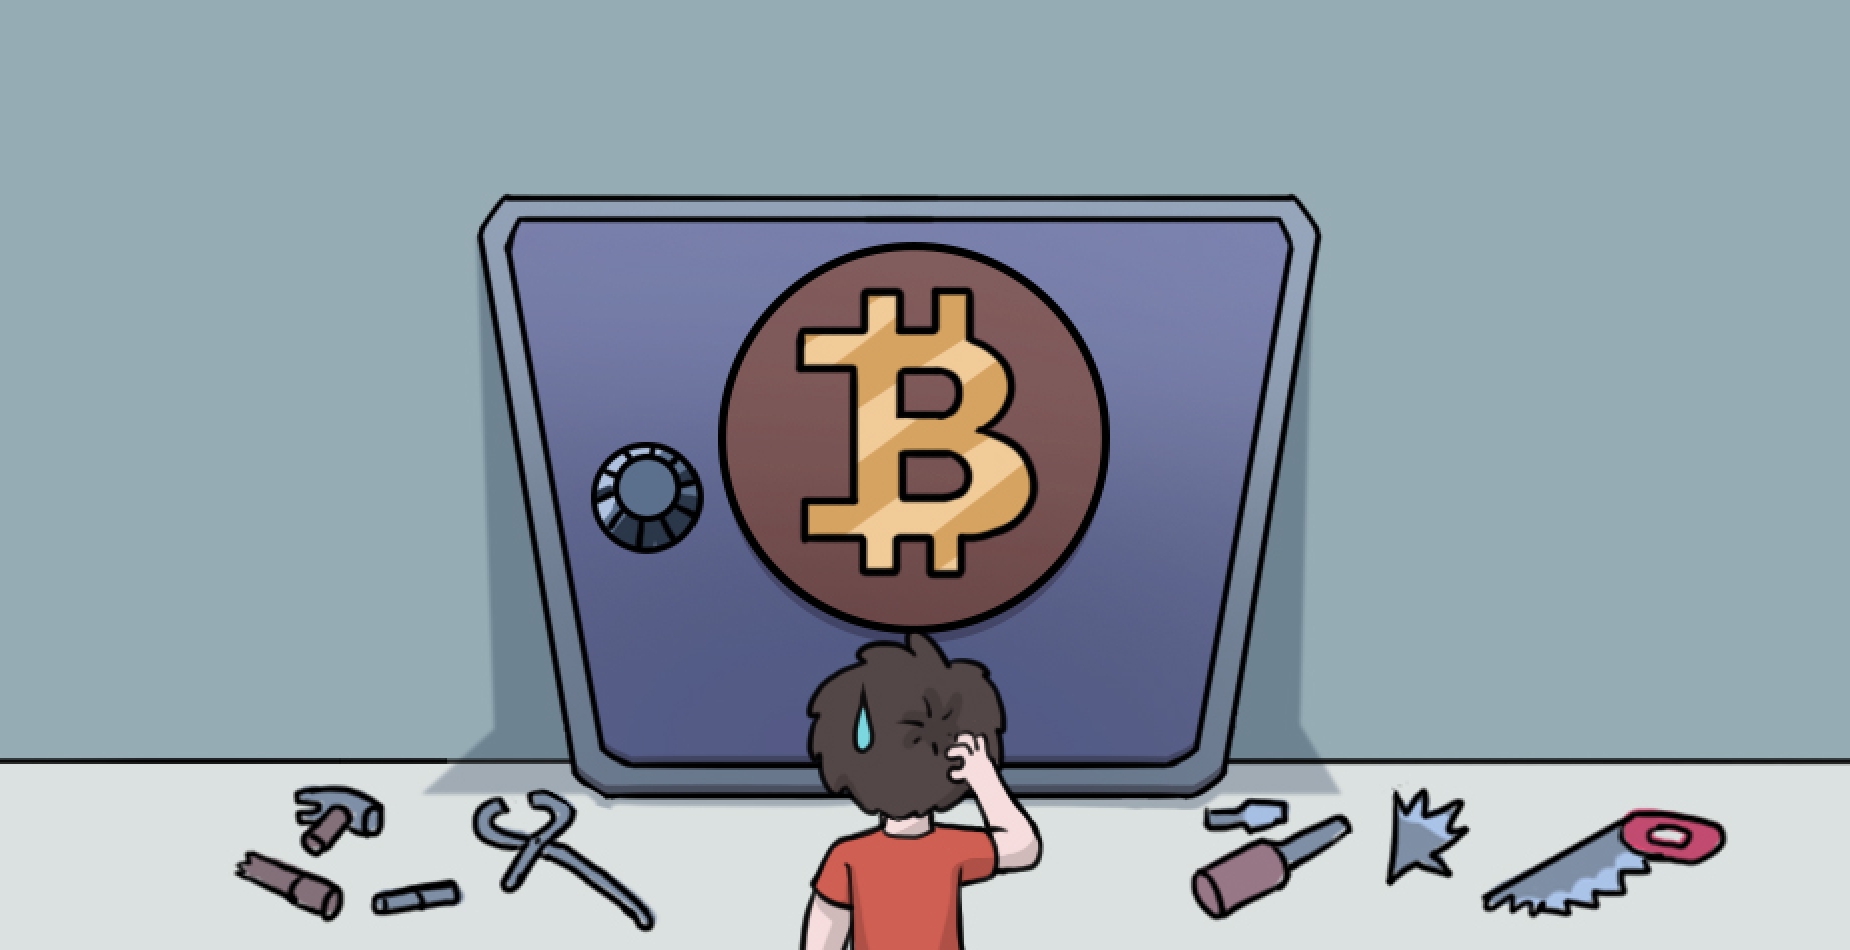 A person trying to unlock a safe with a Bitcoin logo using various tools, appearing to have no success.